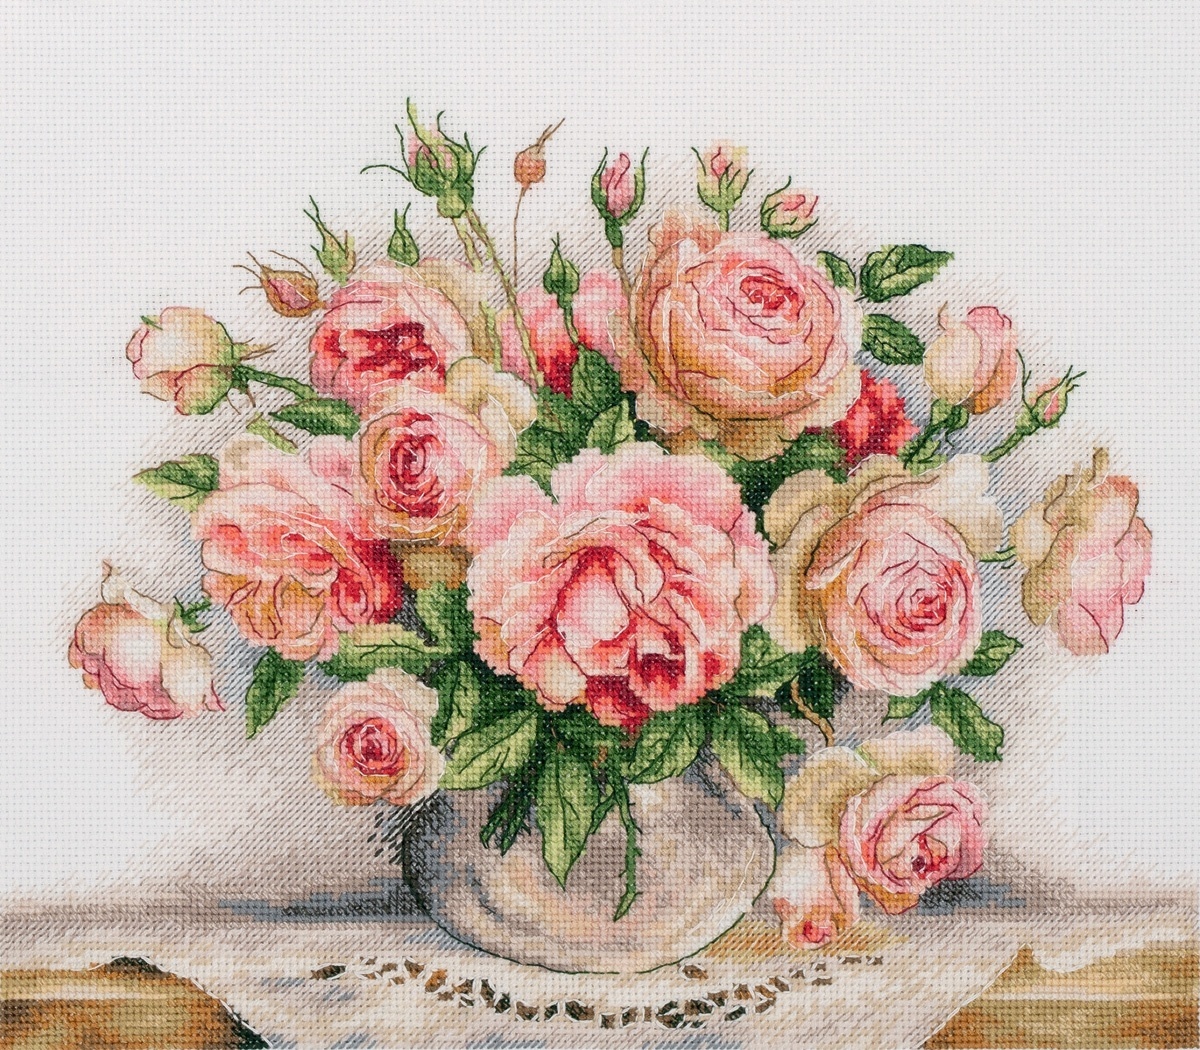 Bouquet of Roses Cross Stitch Kit фото 1